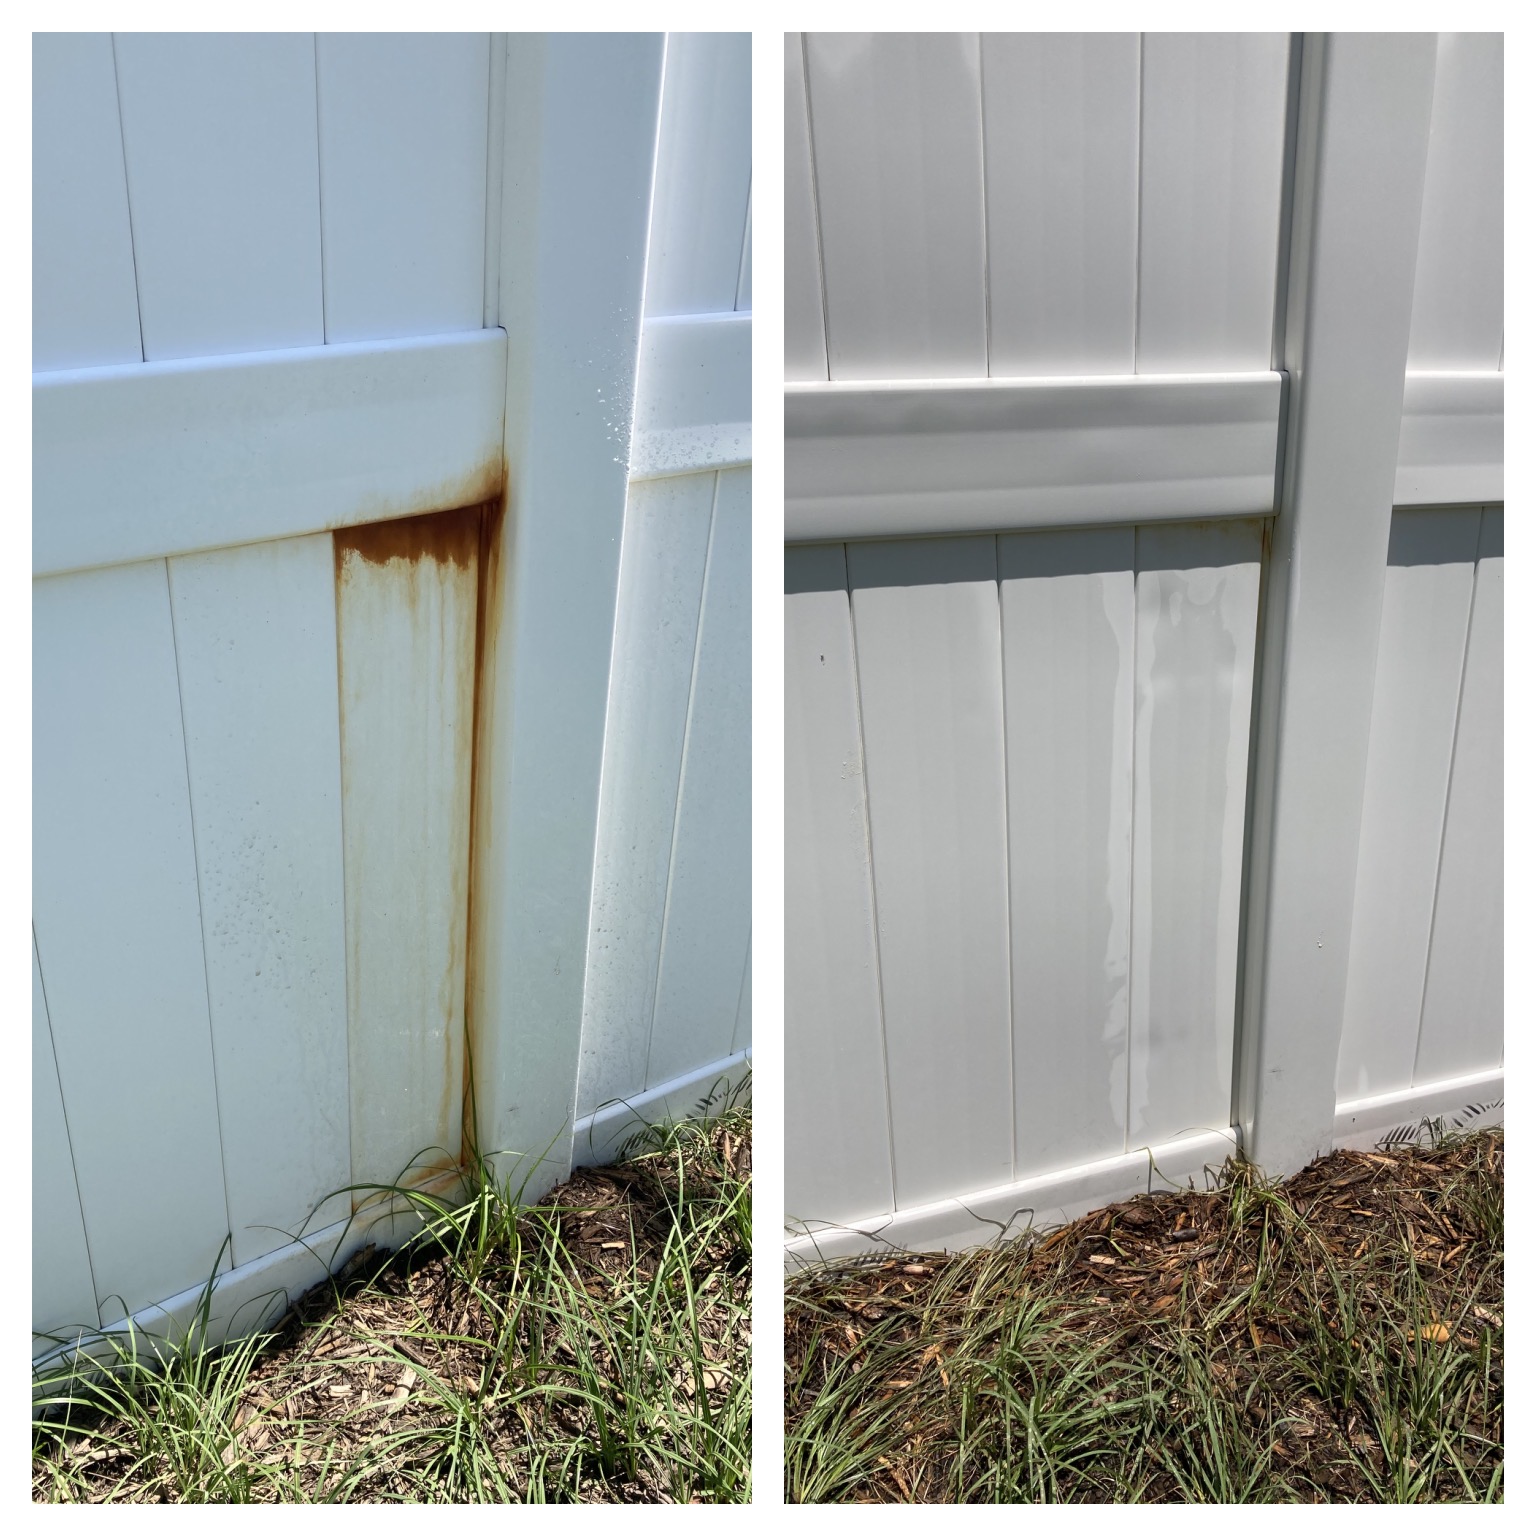 Top-Notch Rust Removal in Rocky Mount, NC